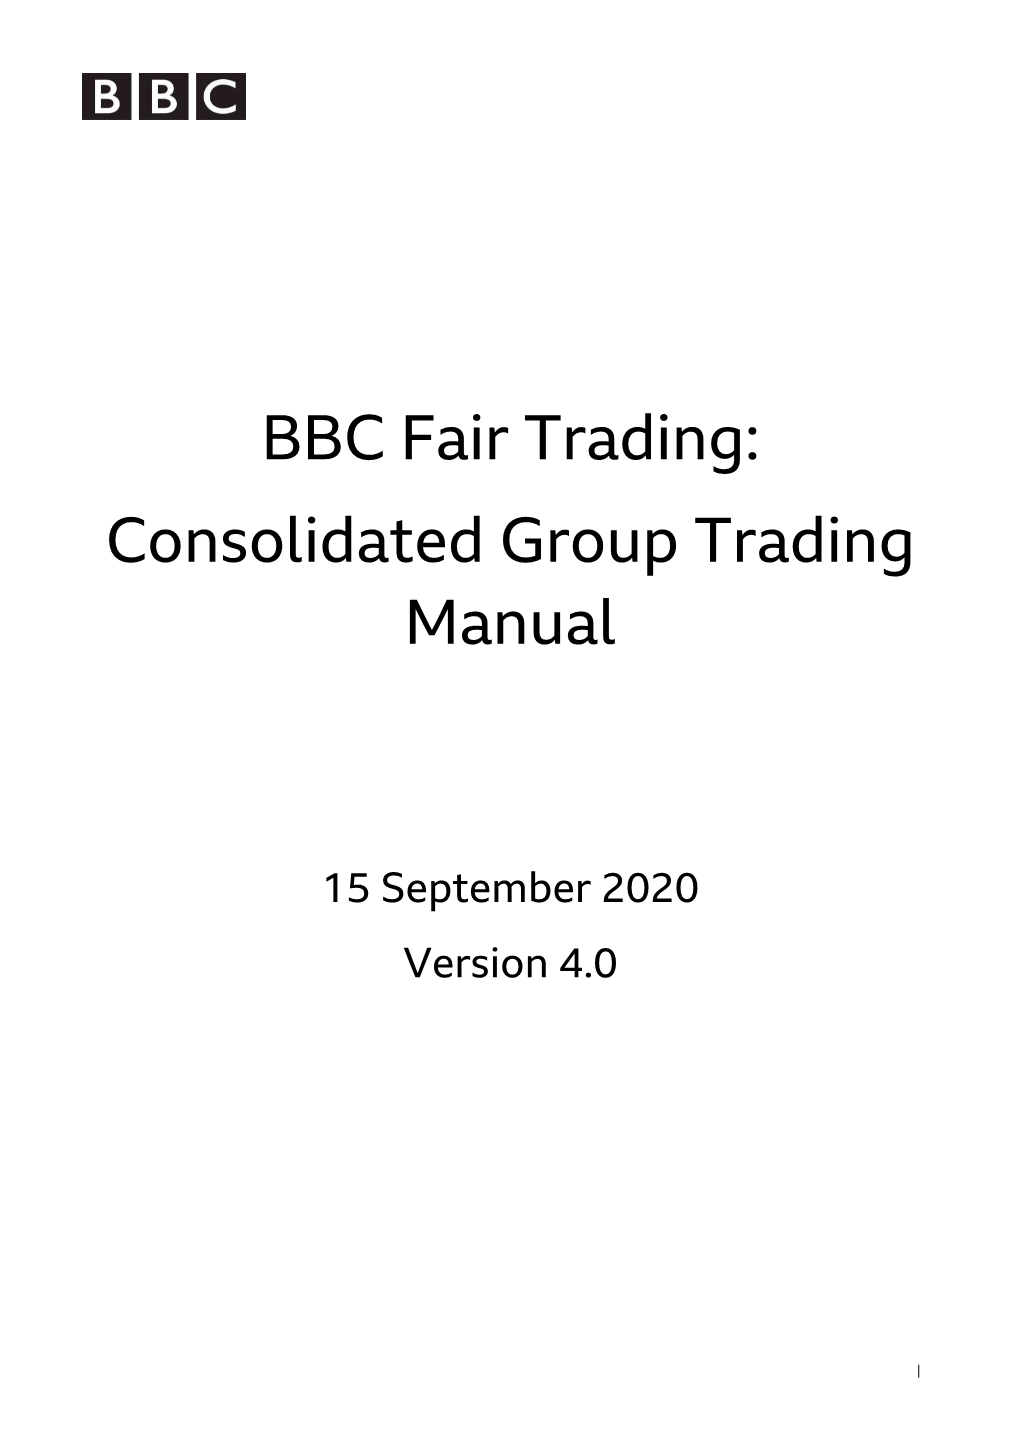 BBC Fair Trading: Consolidated Group Trading Manual